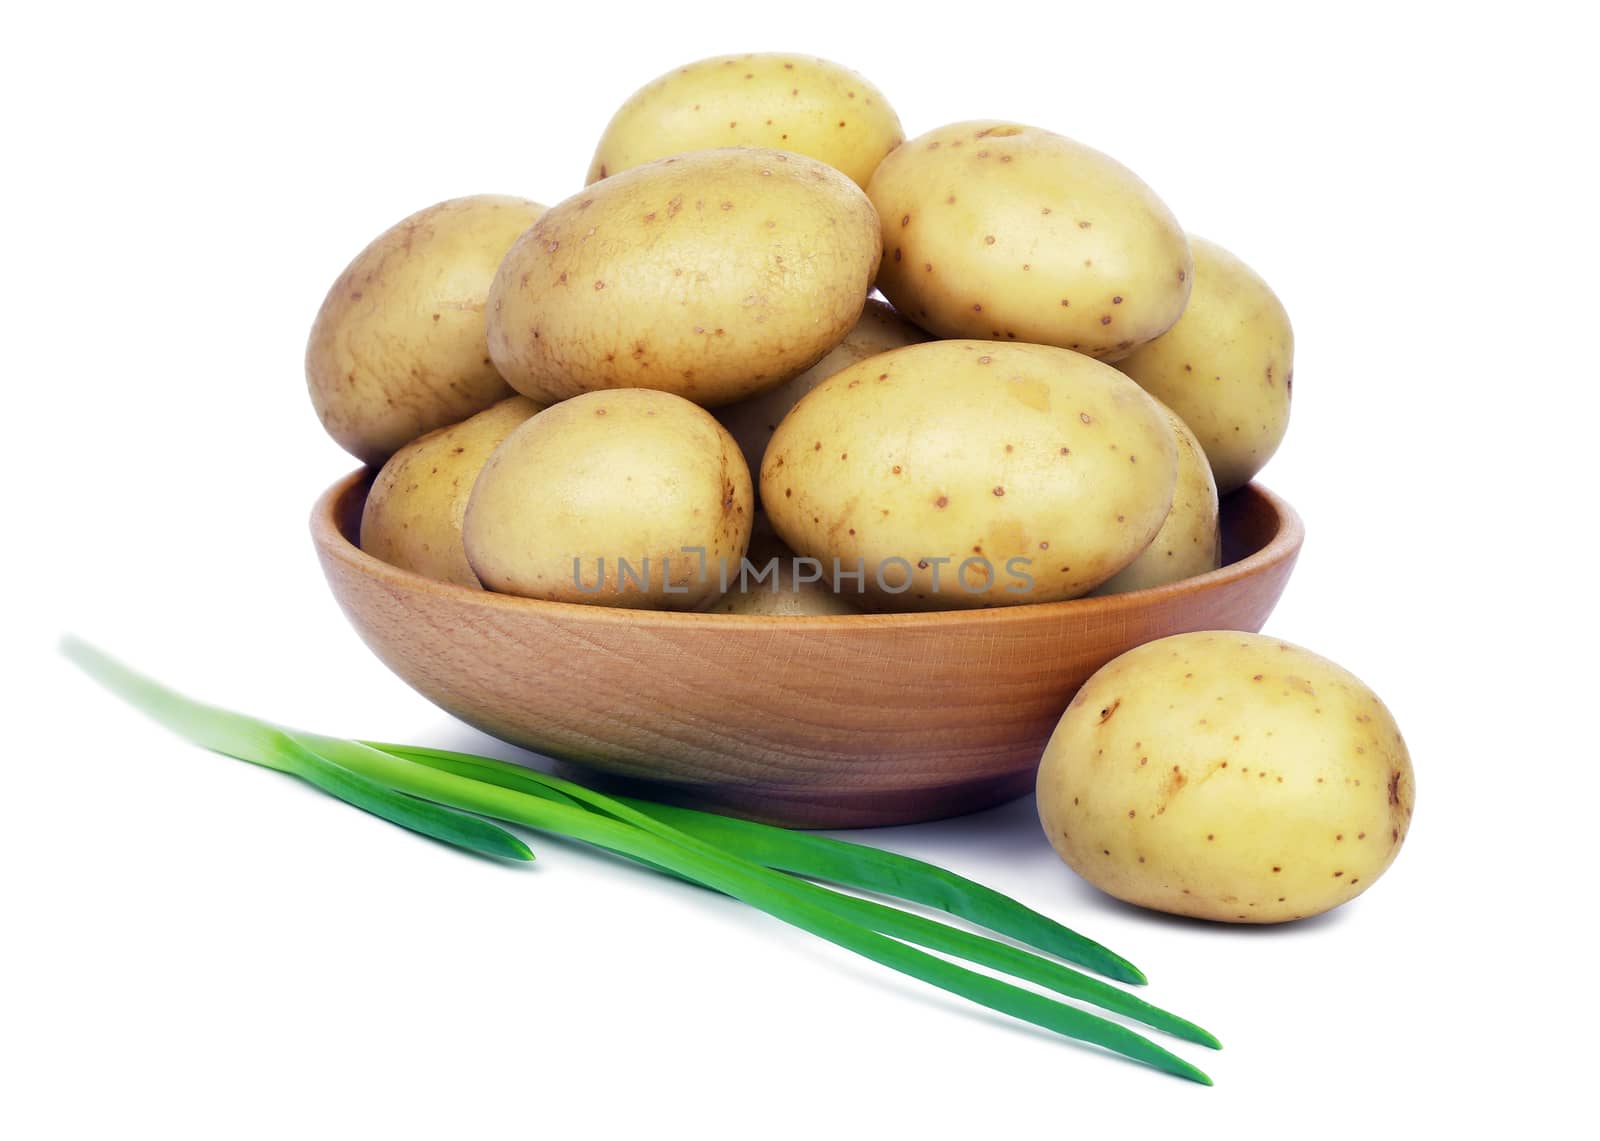 Raw potatoes and green onions by leventina